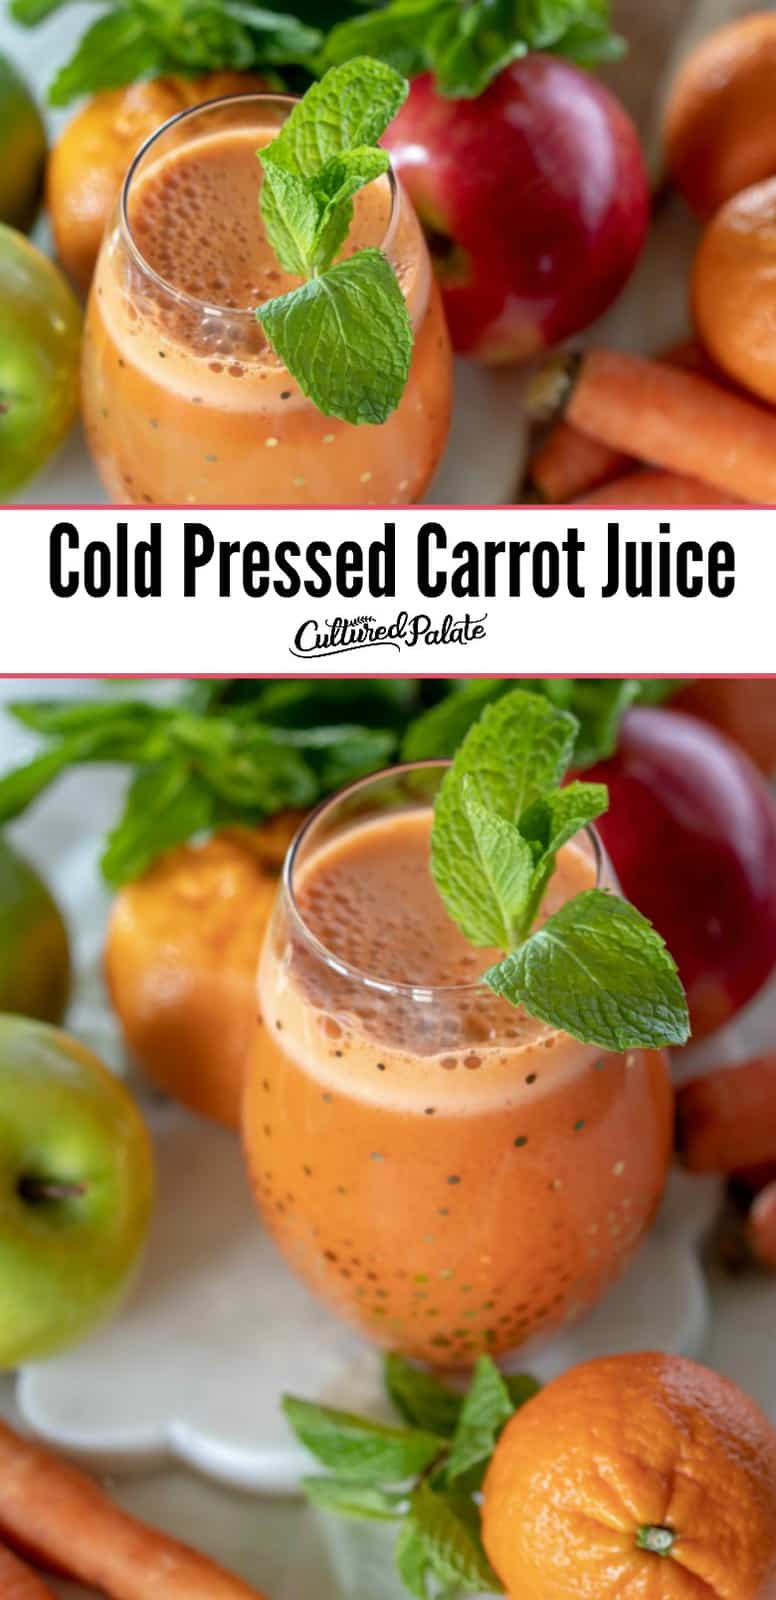 Cold Pressed Carrot Juice Recipe shown in gold accented glass with fruits and veggies around it in two images and text overlay.